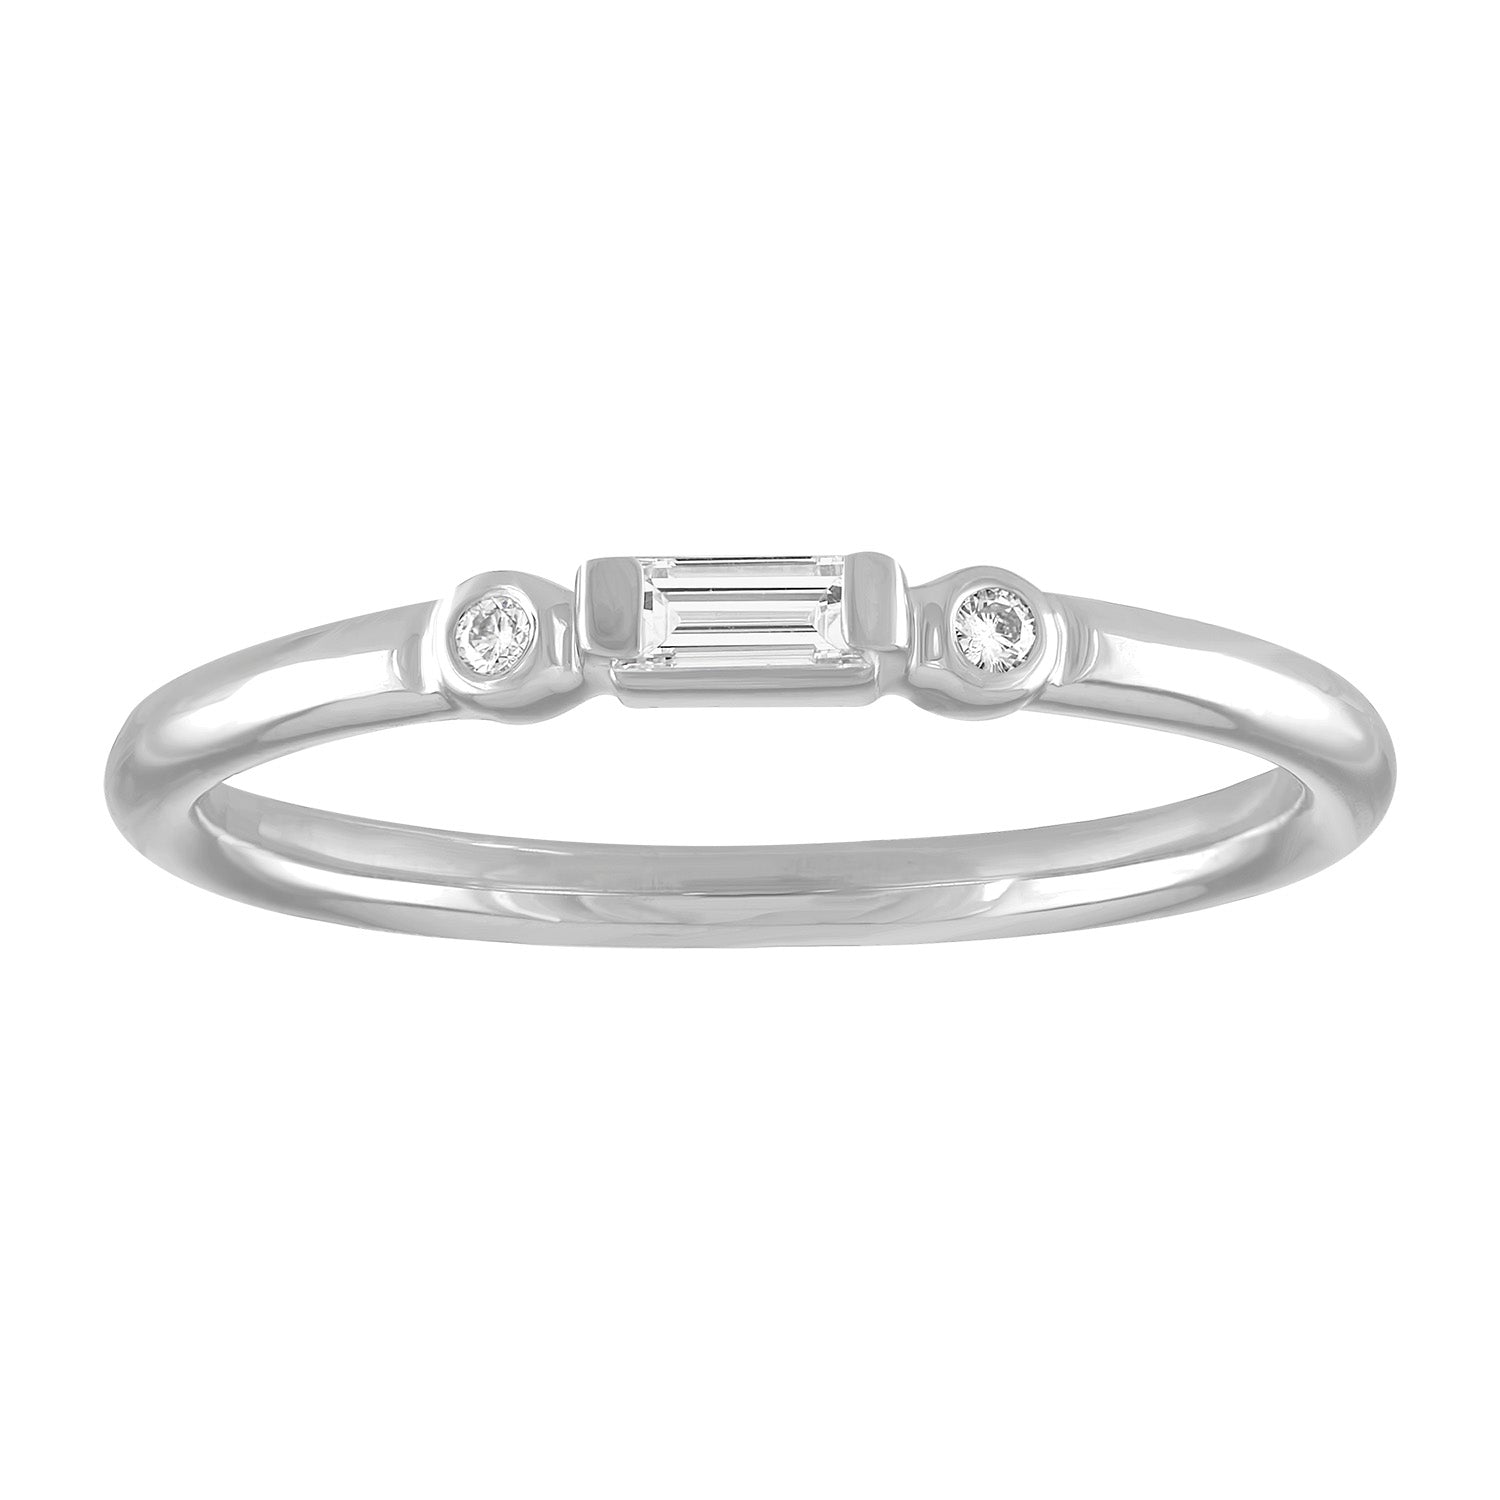 White gold skinny band with a diamond baguette in the center and two round diamonds on the side. 